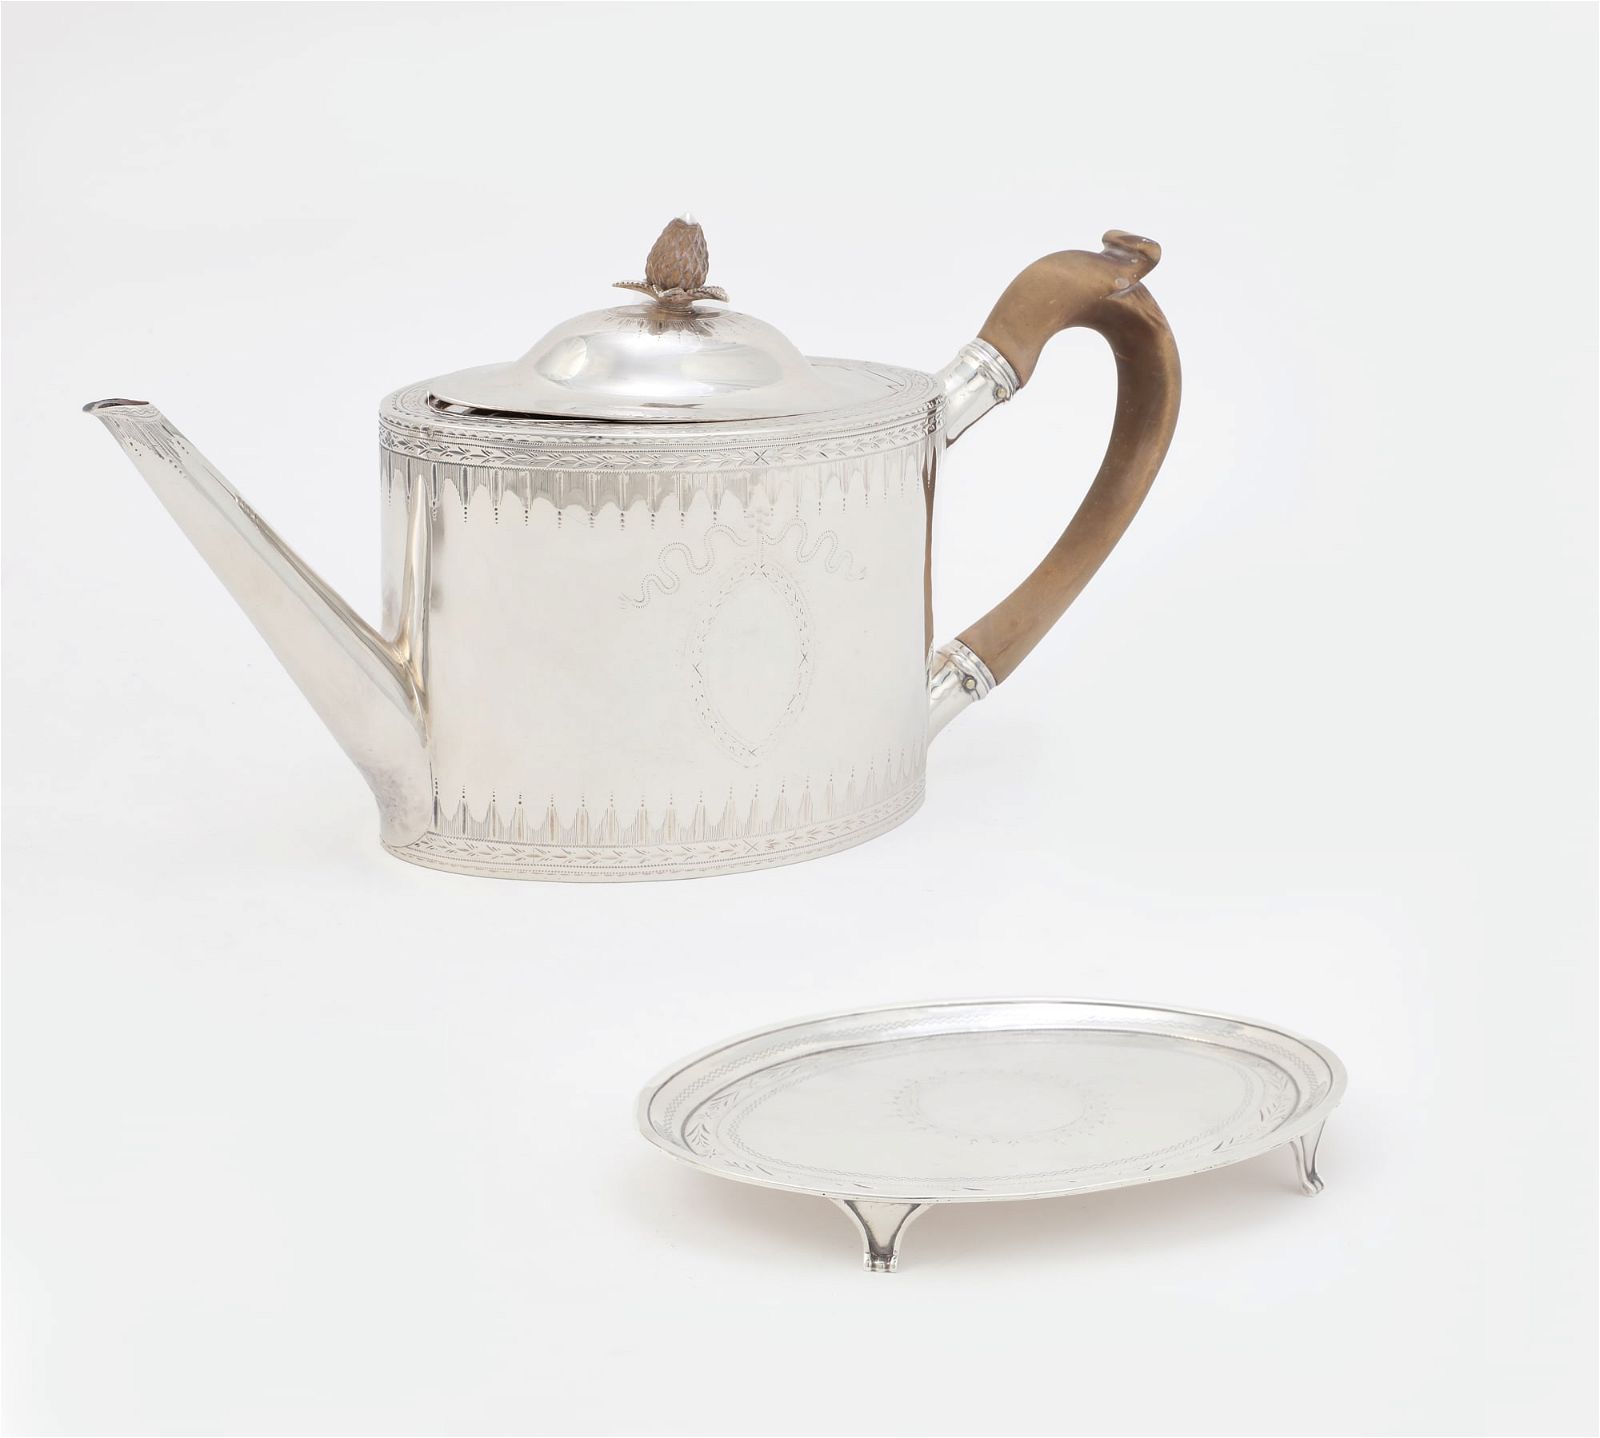 A GEORGE III STERLING SILVER TEAPOT